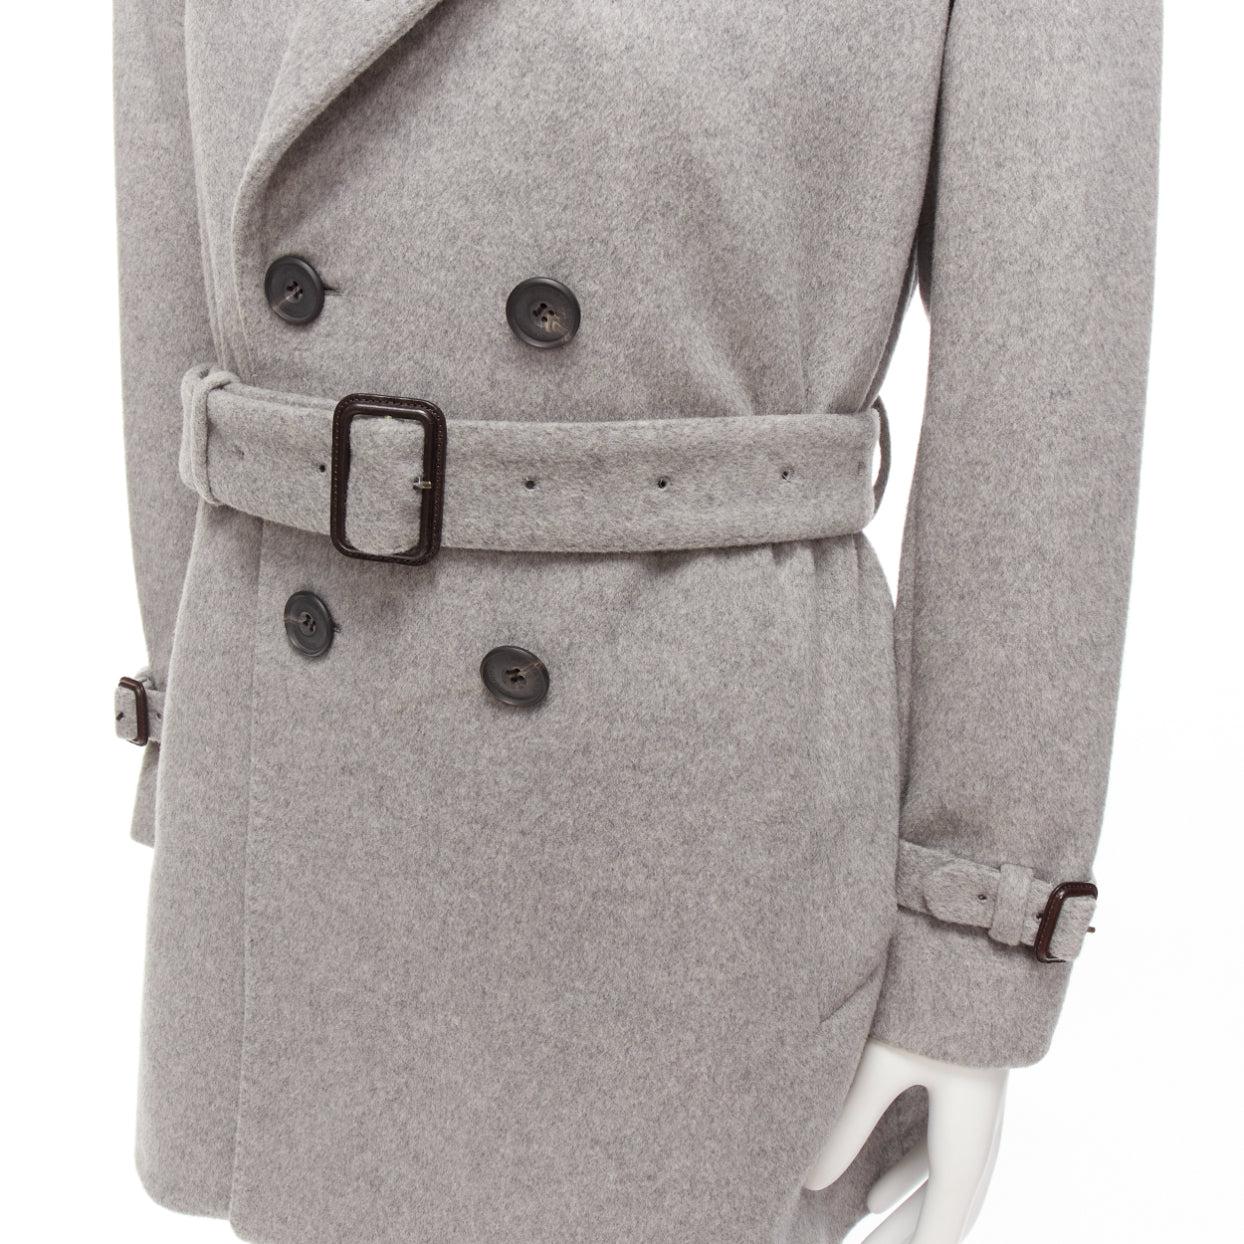 BURBERRY grey virgin wool cashmere logo horn button trench coat IT48 M
Reference: YIKK/A00032
Brand: Burberry
Material: Virgin Wool, Cashmere
Color: Grey, Brown
Pattern: Solid
Closure: Button
Lining: Grey Fabric
Extra Details: Belted. Back yoke.